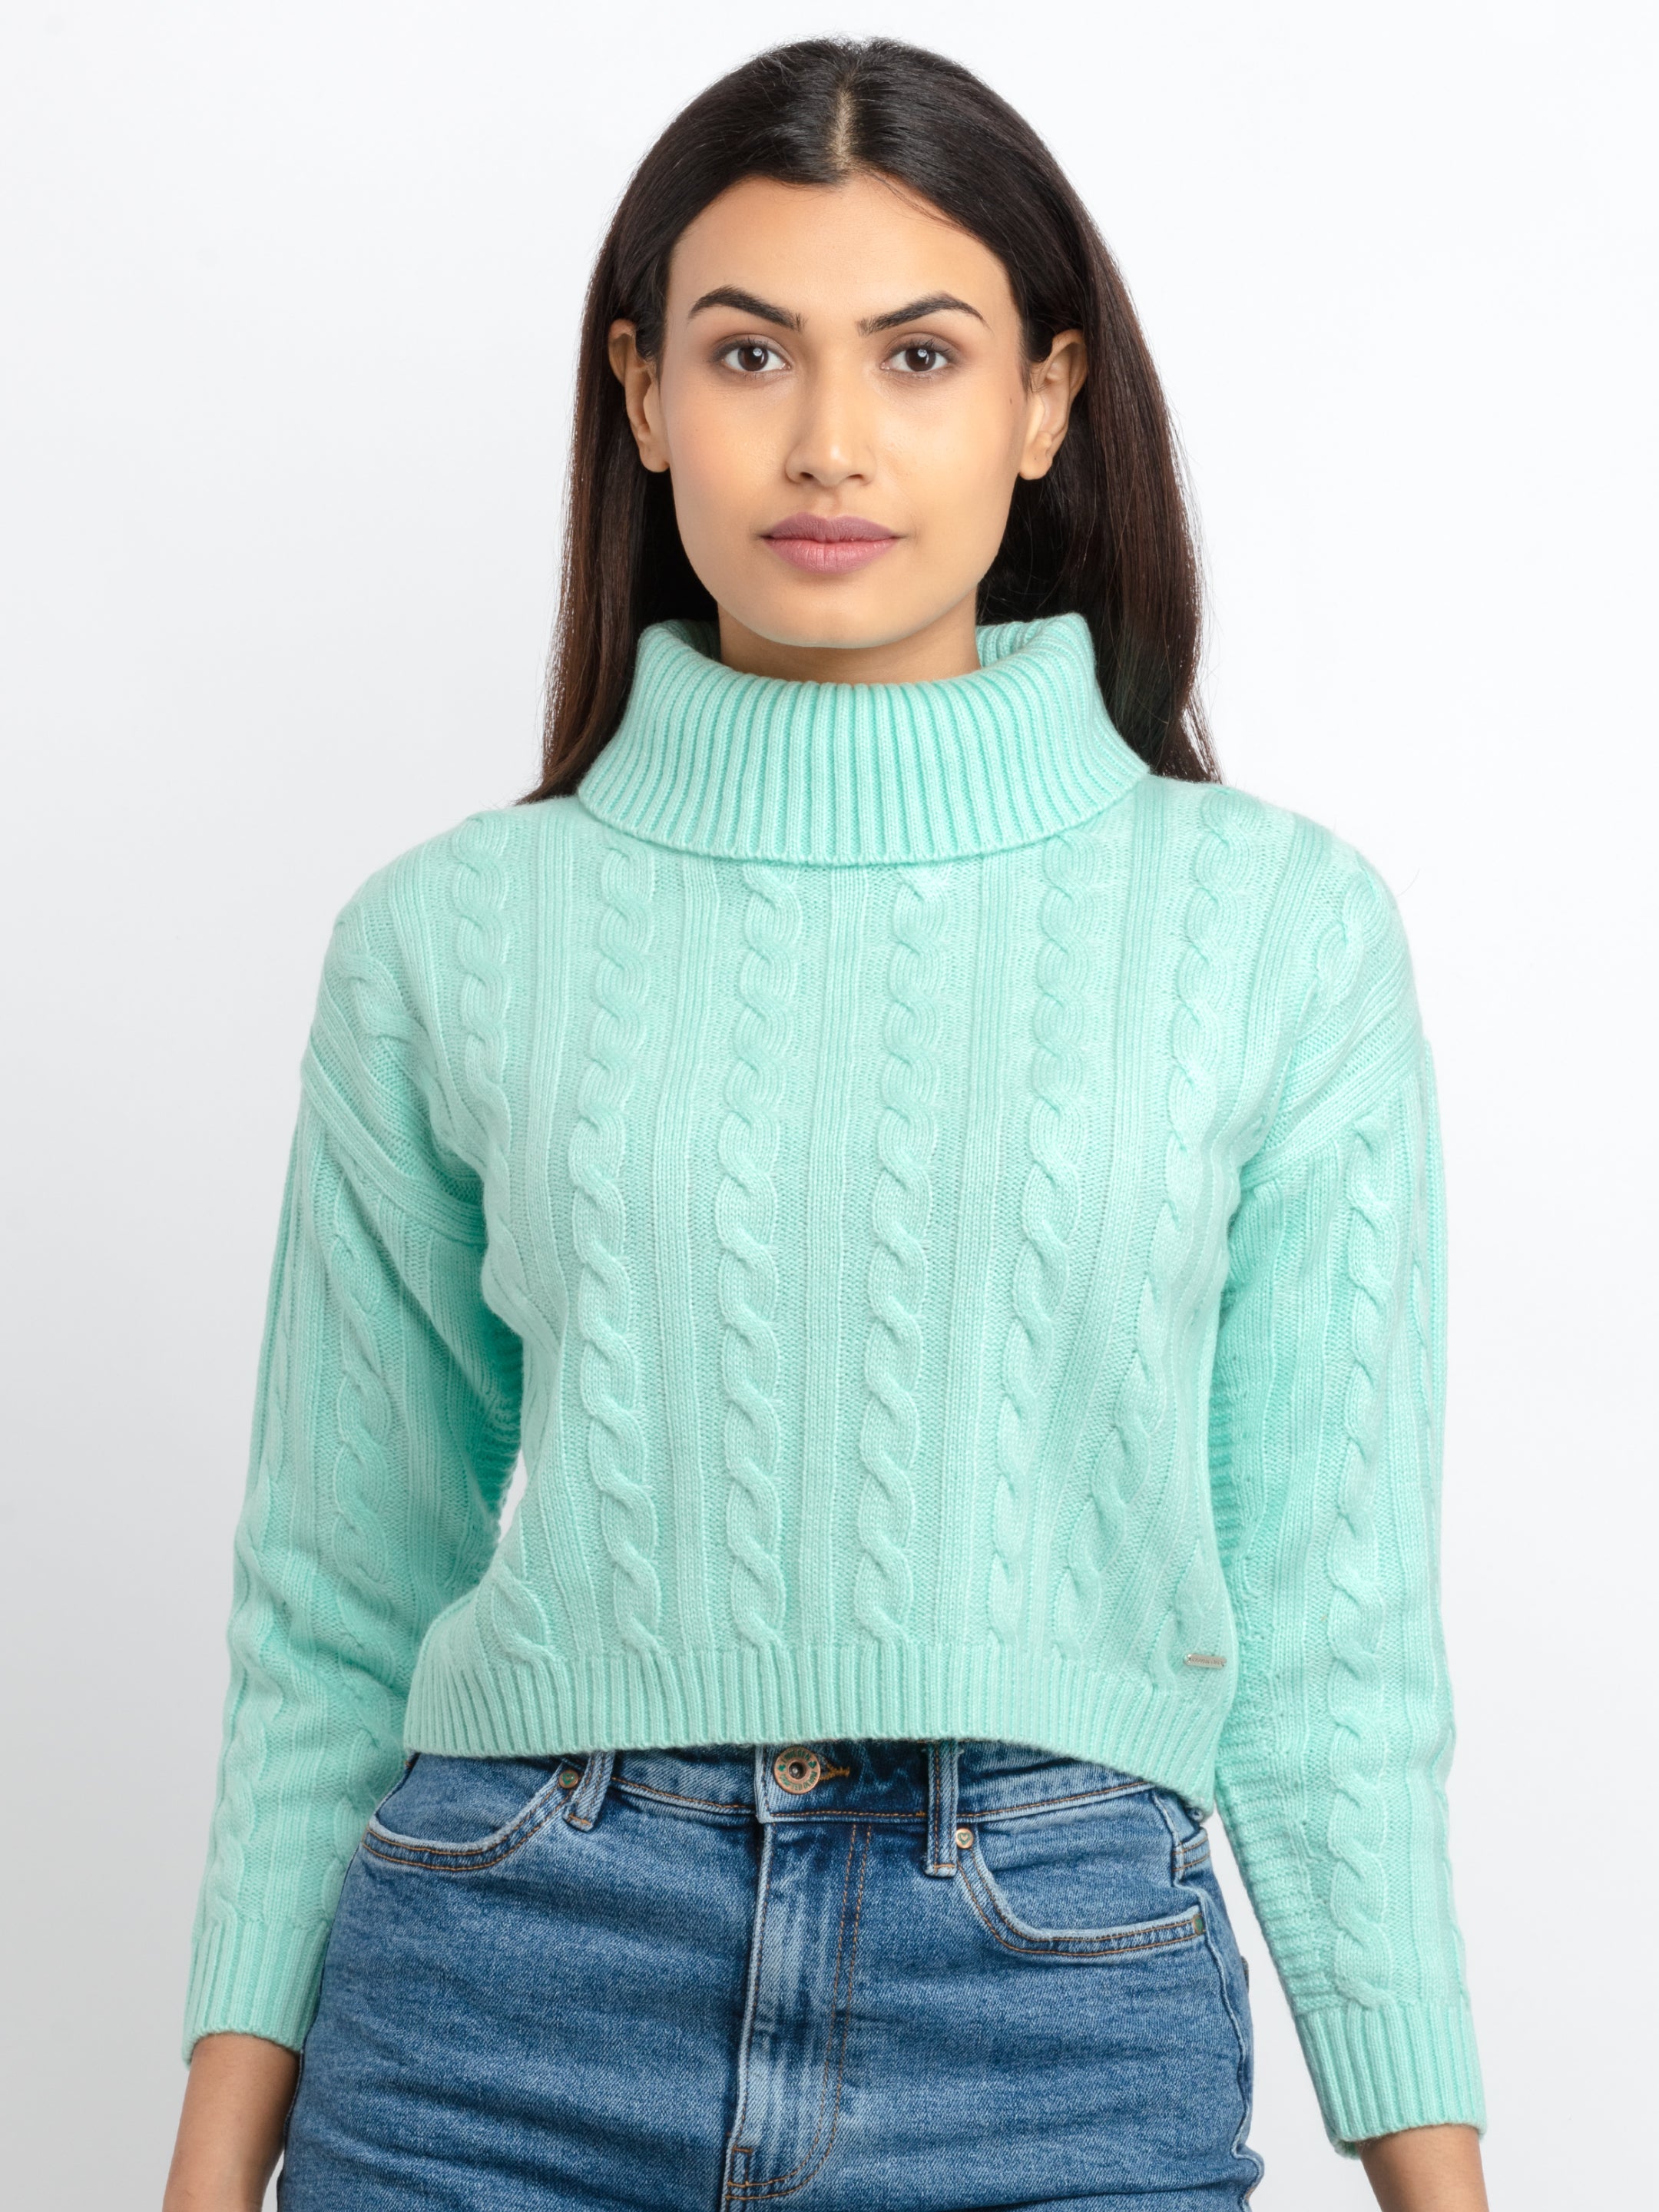 Womens Cable Knit Turtle Neck Sweater - S / Sea Green / SQW-FK-22966-Sea  Green